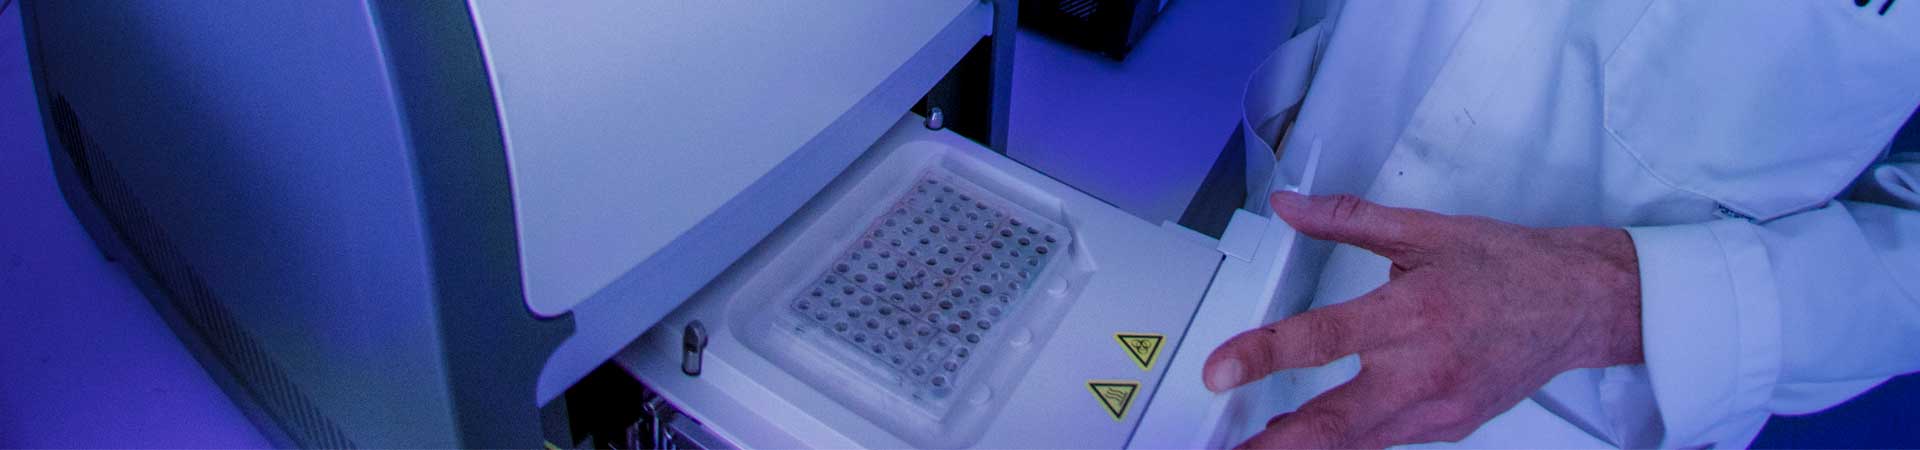 Sample with molecular biology extracts prepared for analysis